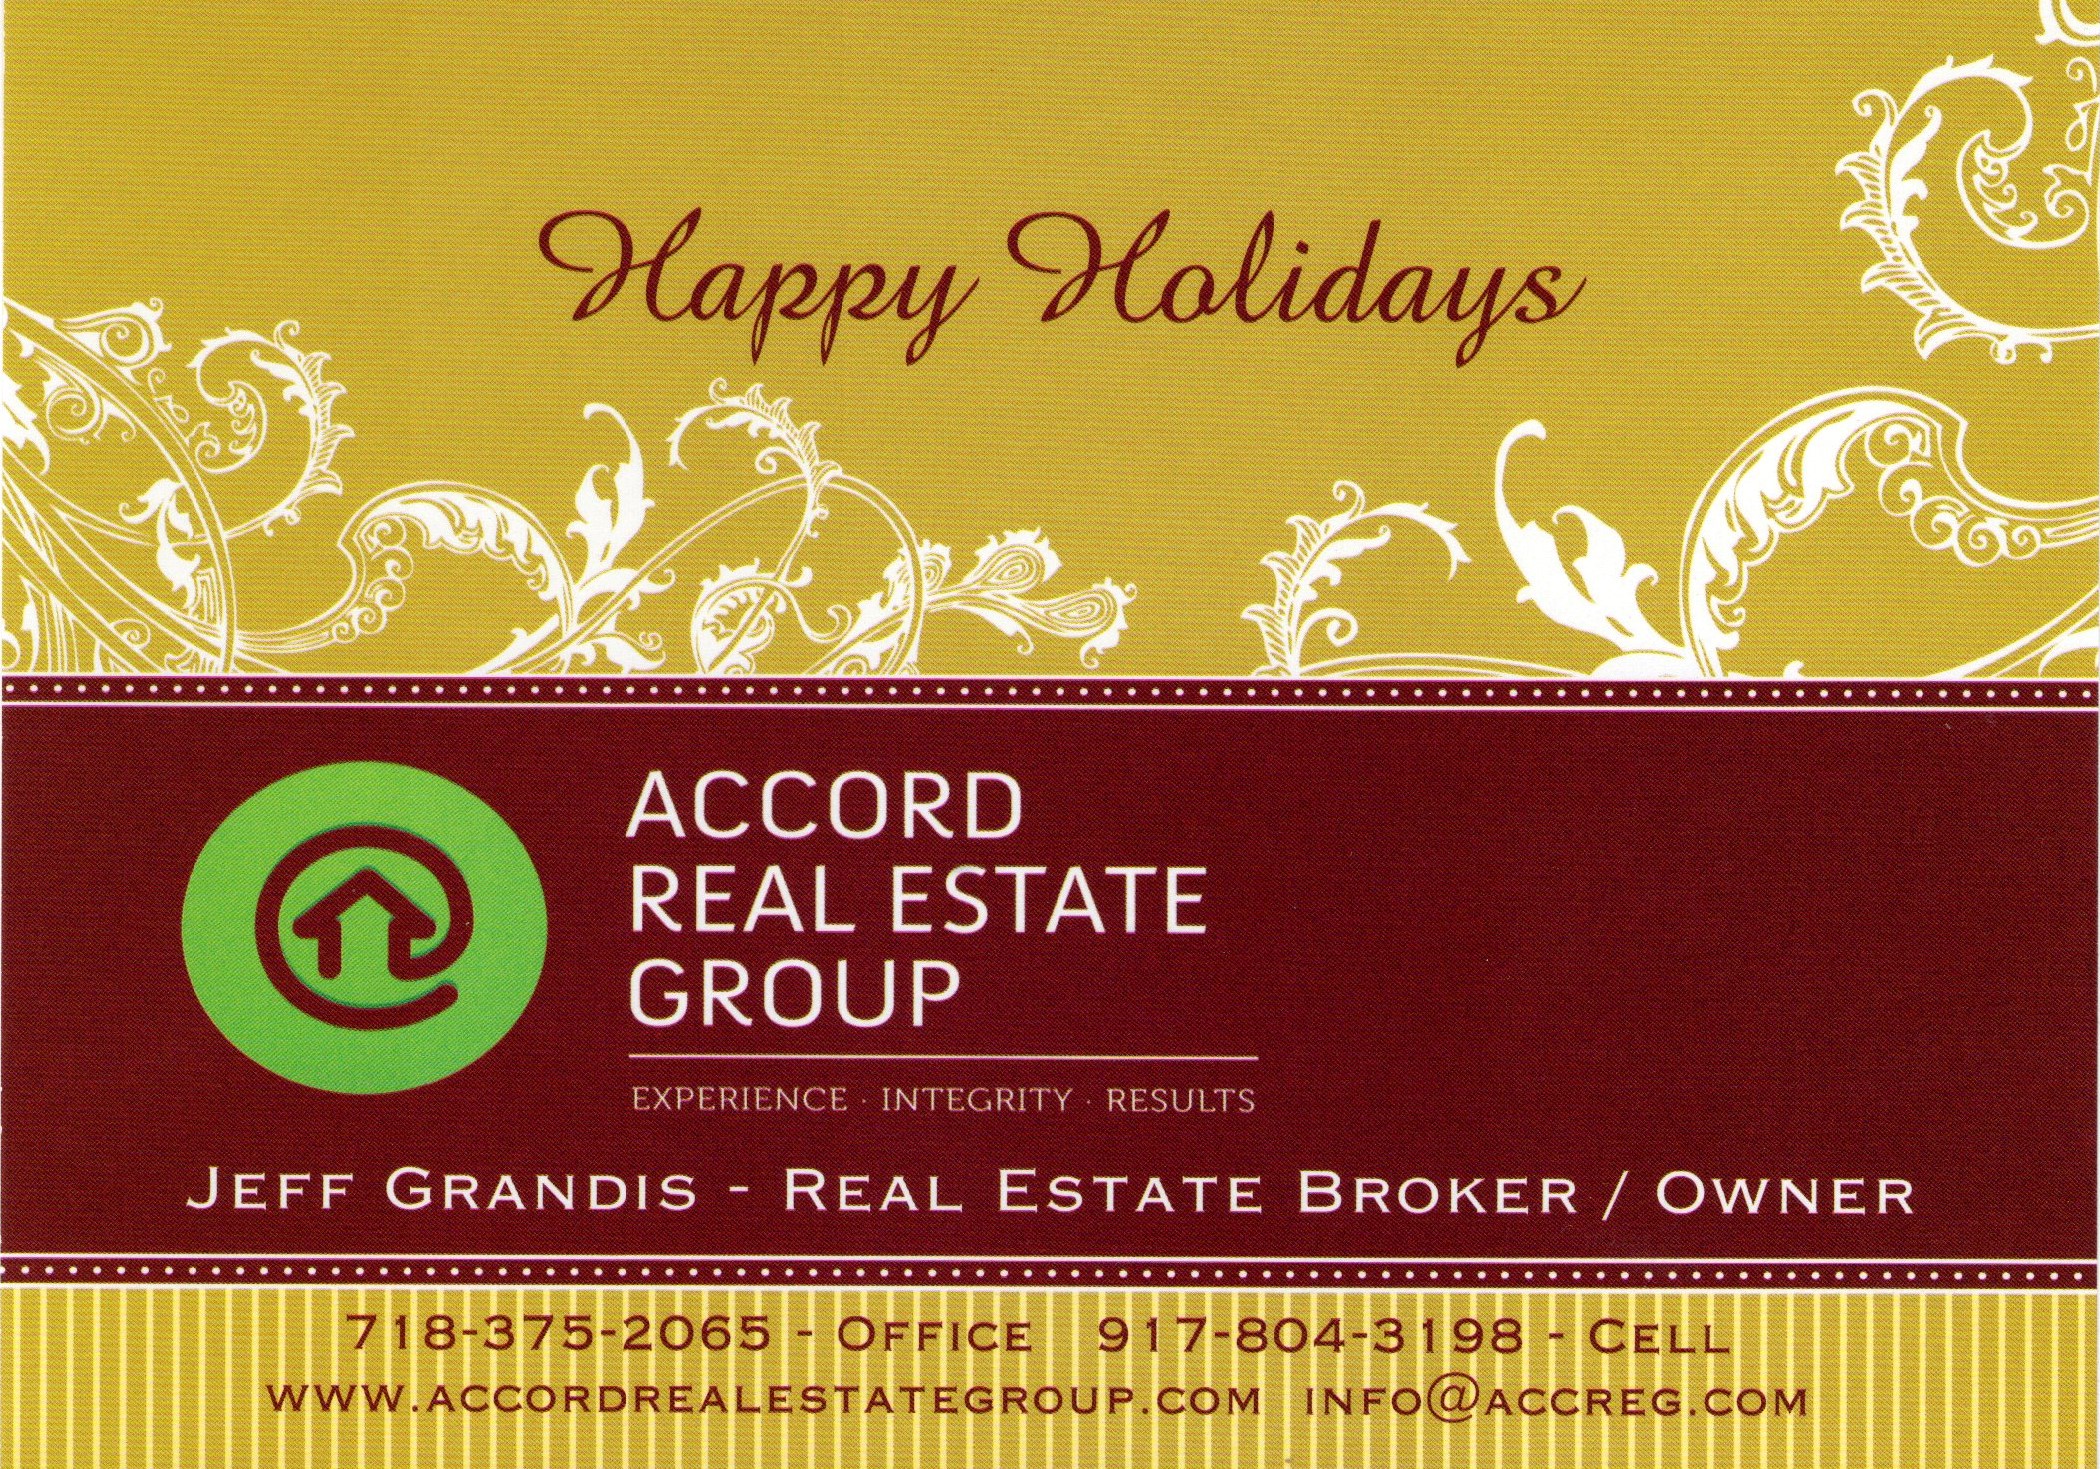 Happy Holidays-Labor Day- from Accord Real Estate Group